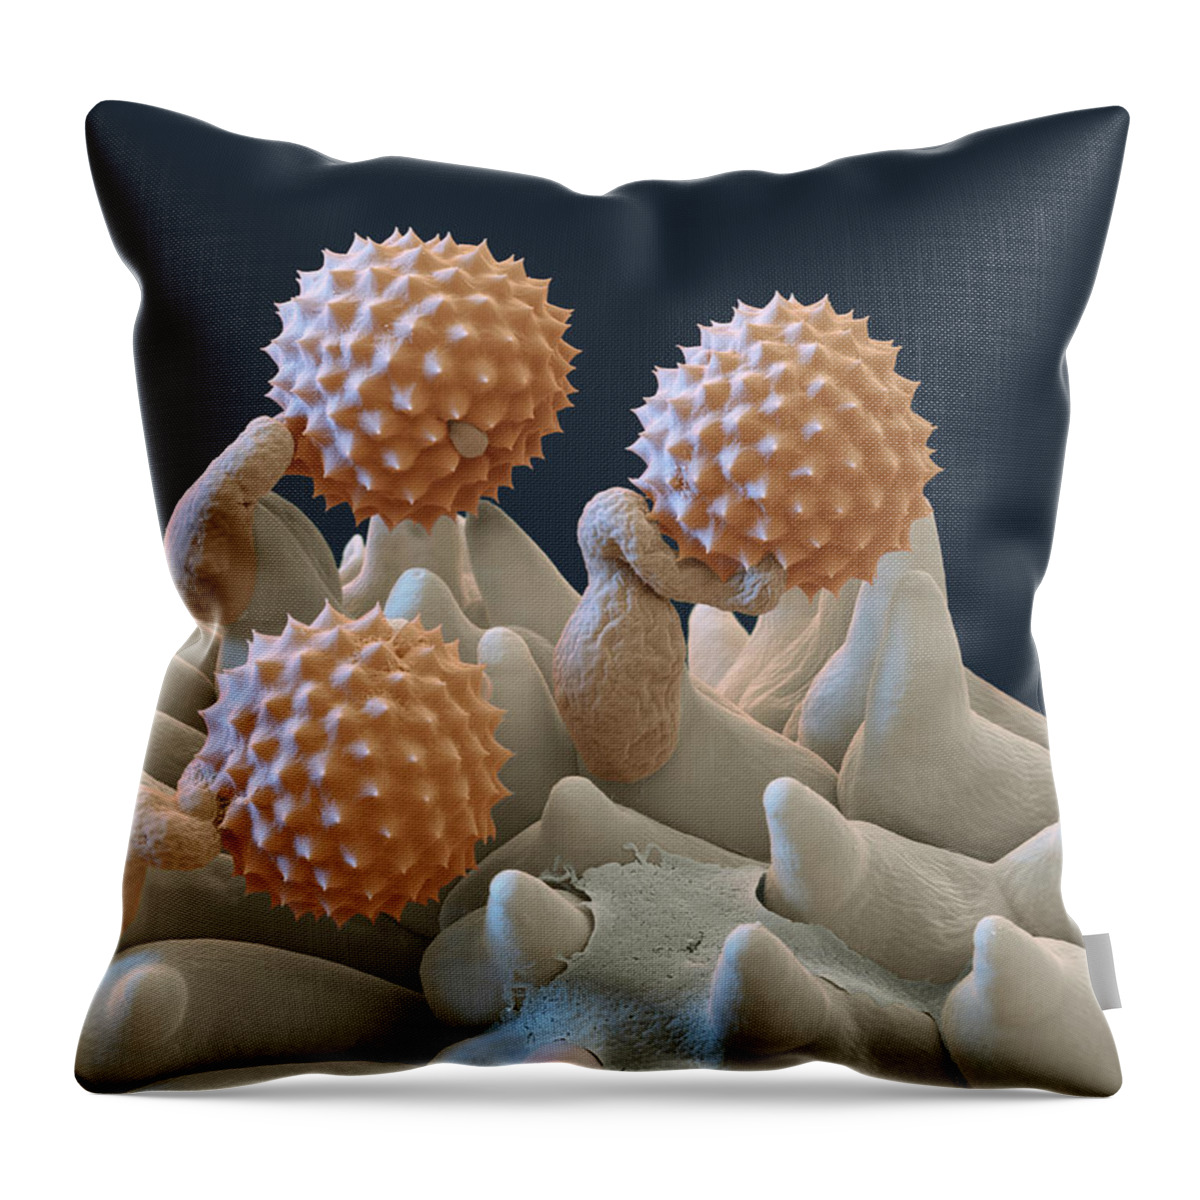 Ambrosia Throw Pillow featuring the photograph Pollen And Pollen Tubes, Sem by Oliver Meckes EYE OF SCIENCE